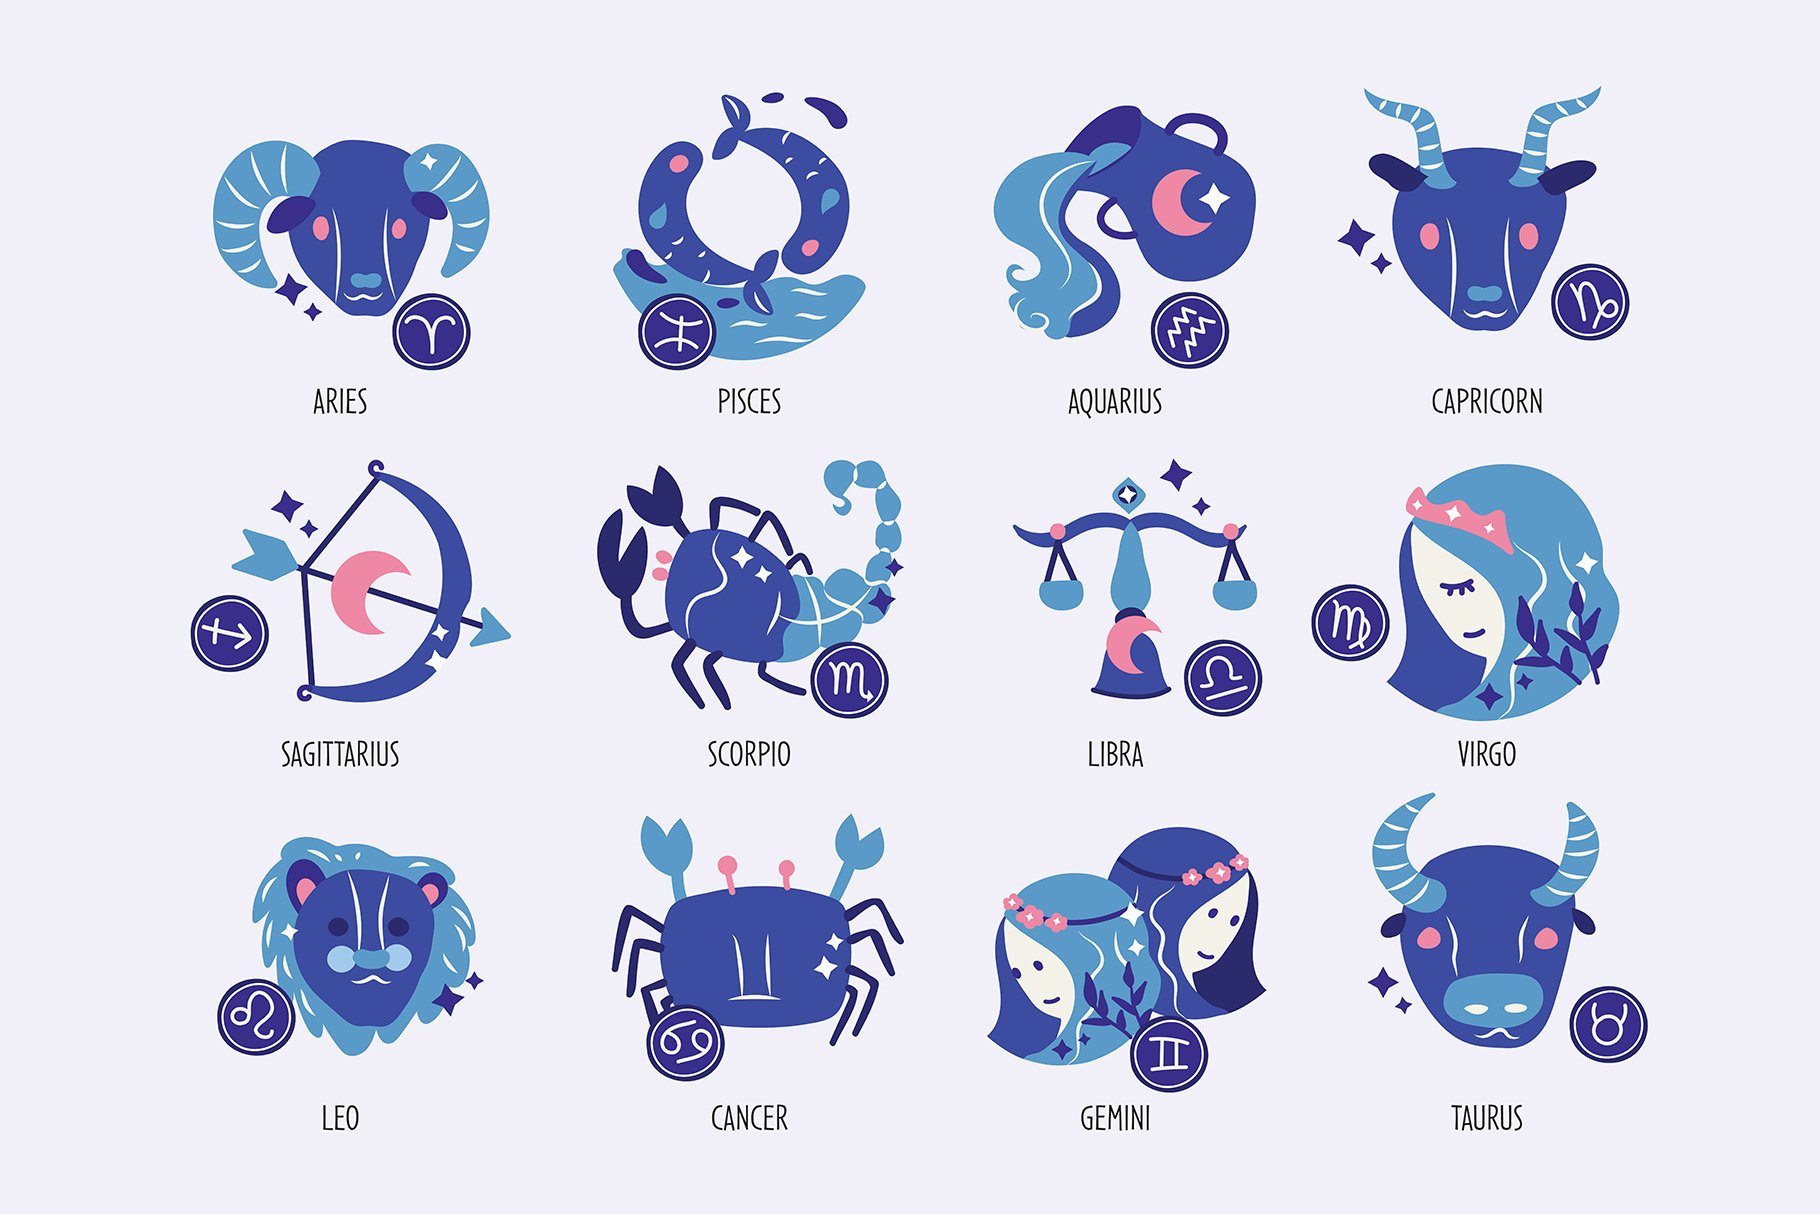 All zodiac signs in a blue with the interesting design.